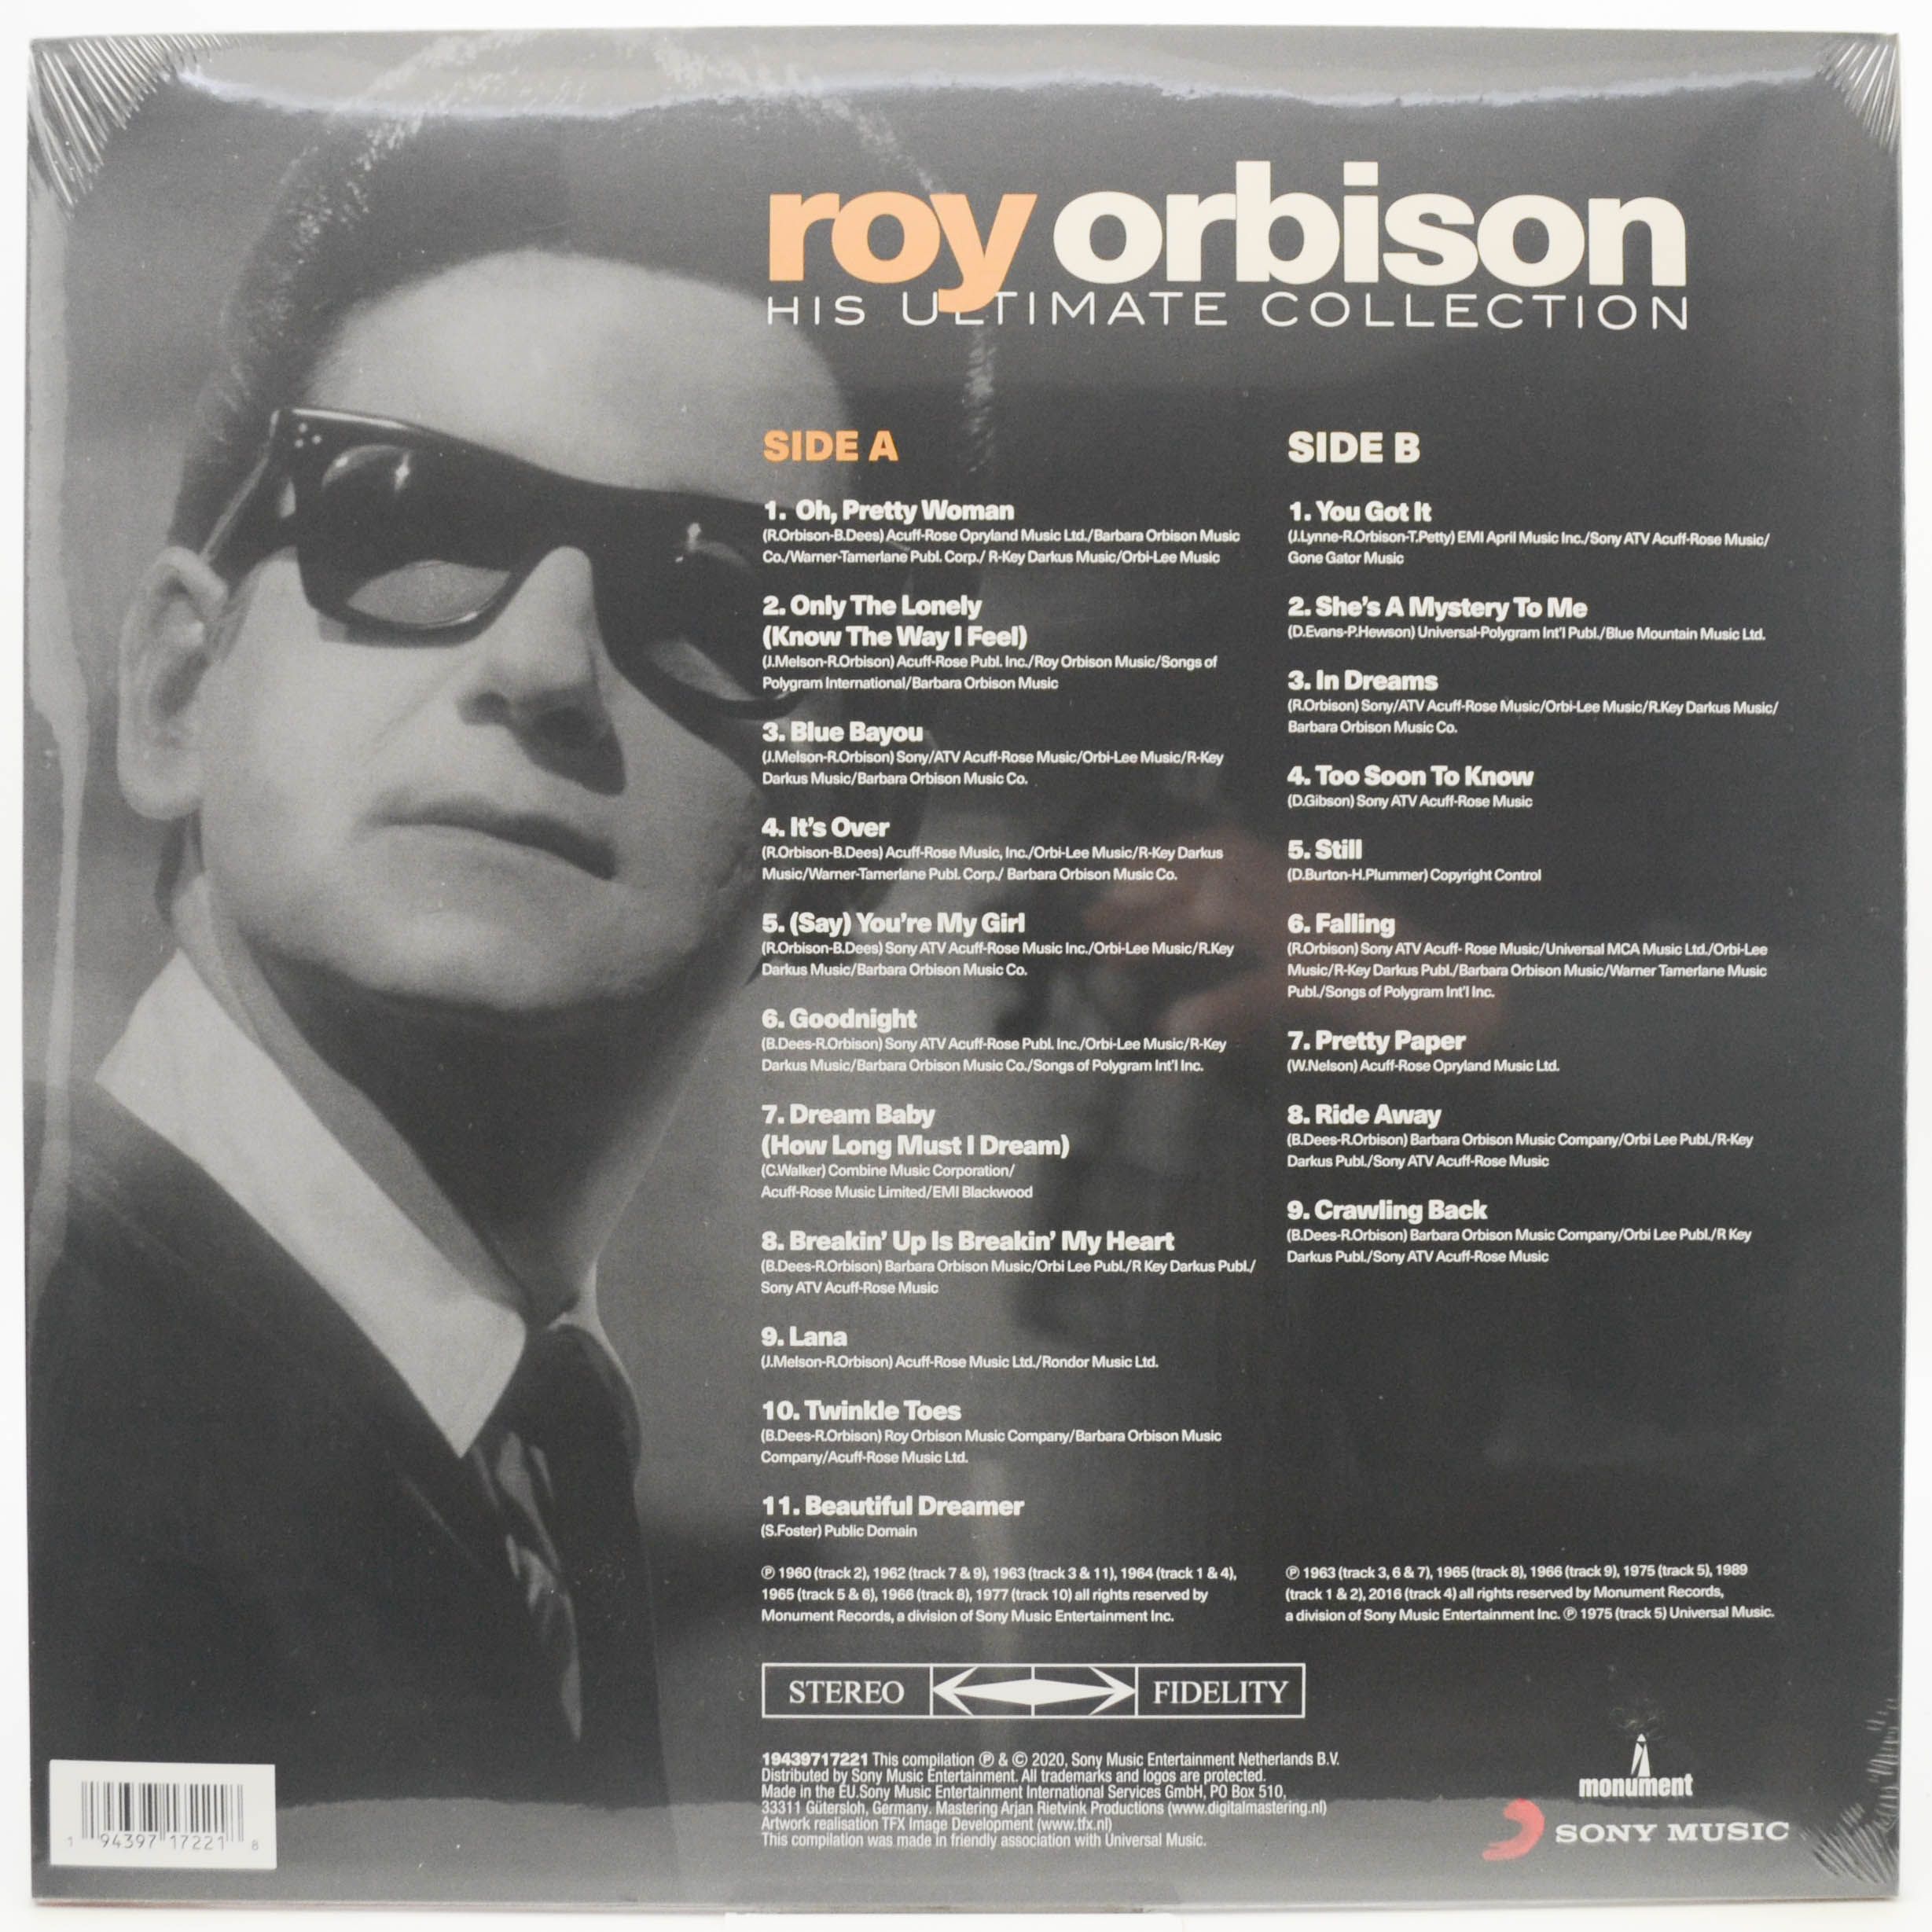 Roy Orbison — His Ultimate Collection, 2021